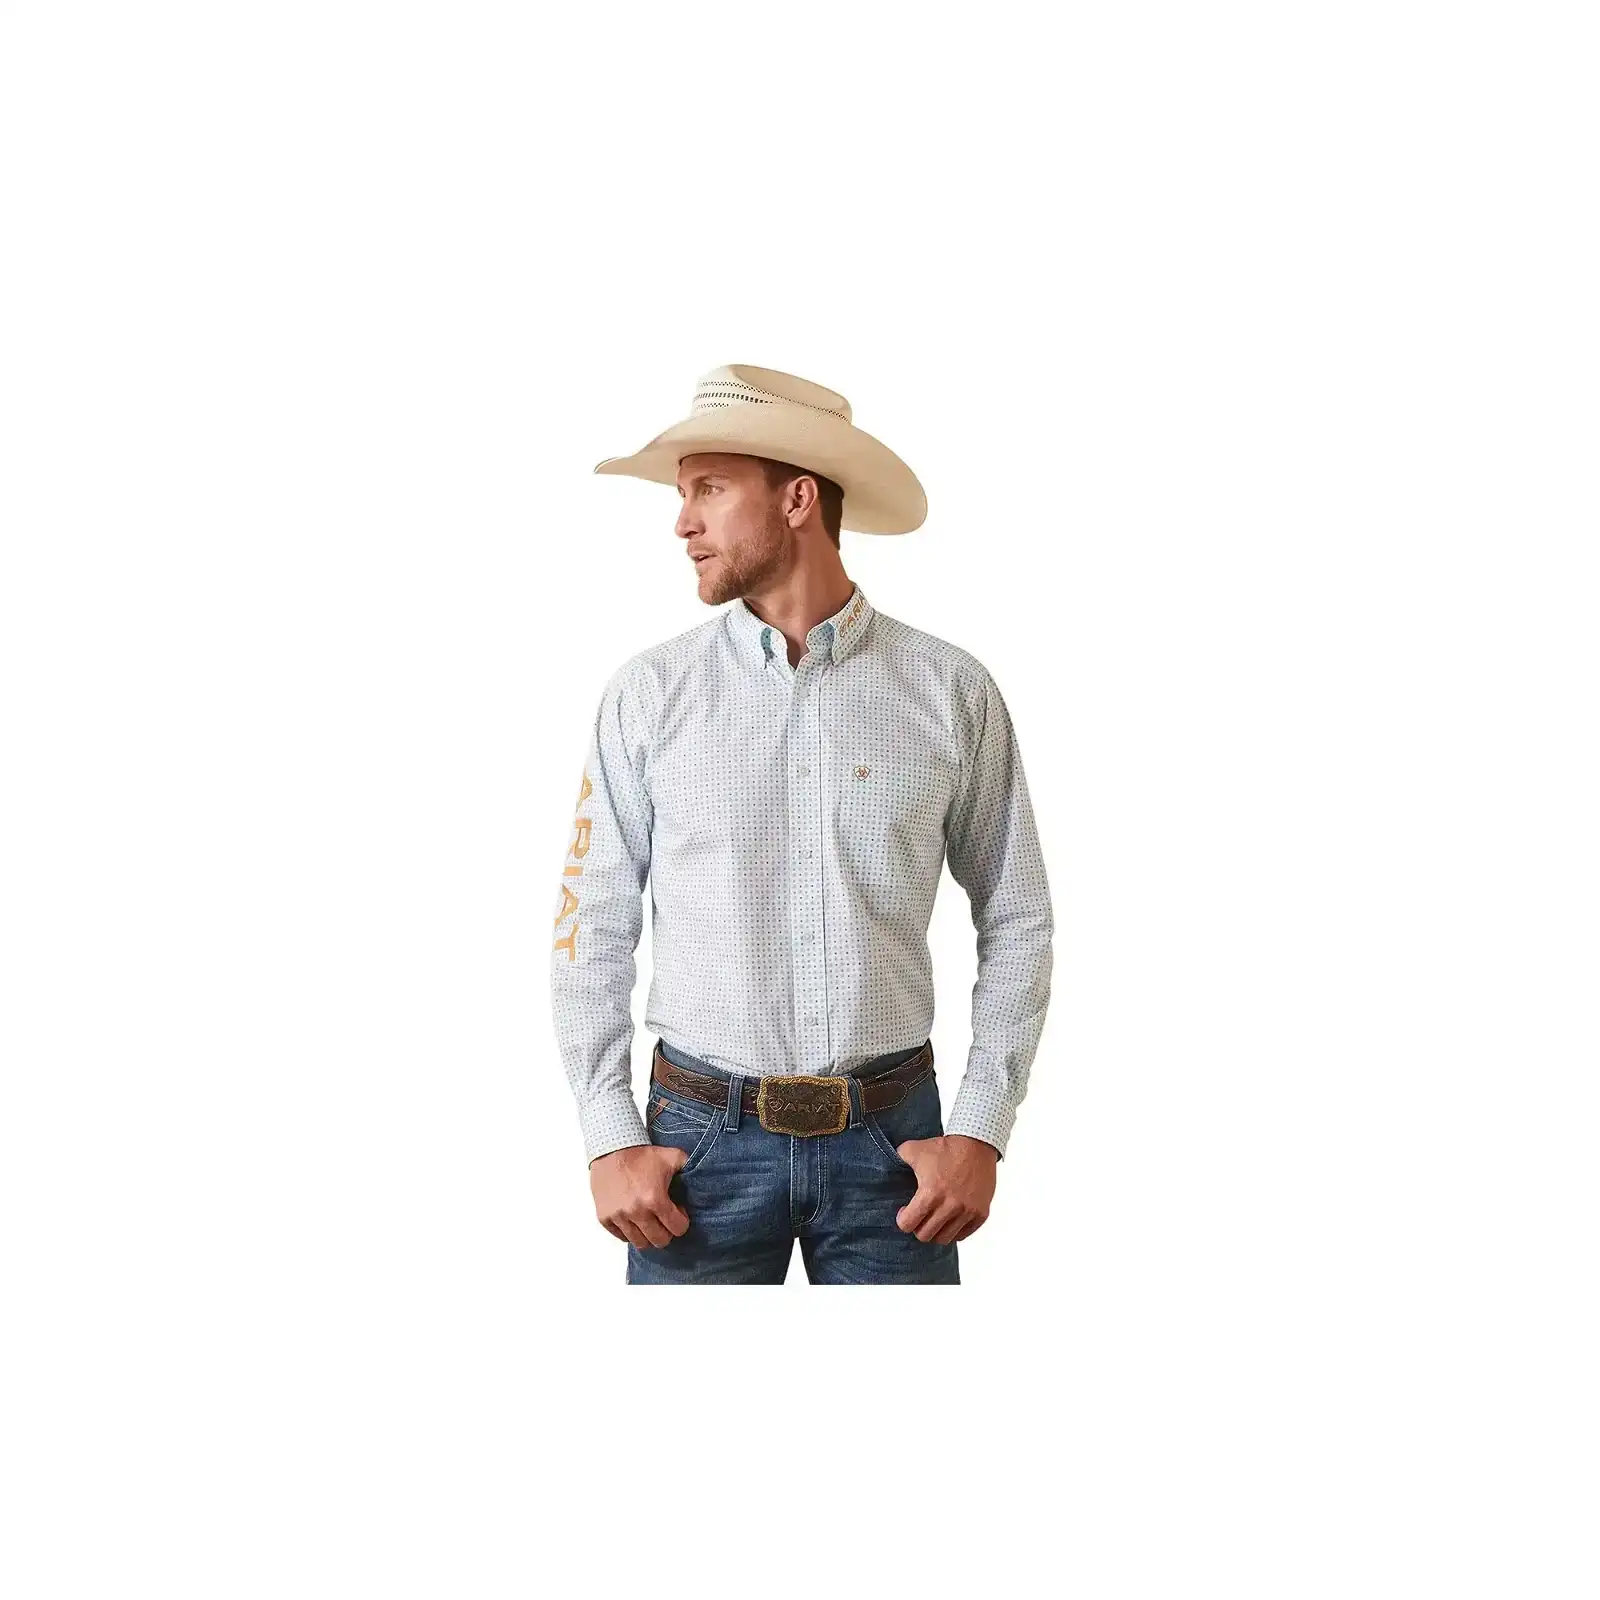 Ariat Casual Series Fitted Team Stuart Shirt Long Sleeve White Paisley